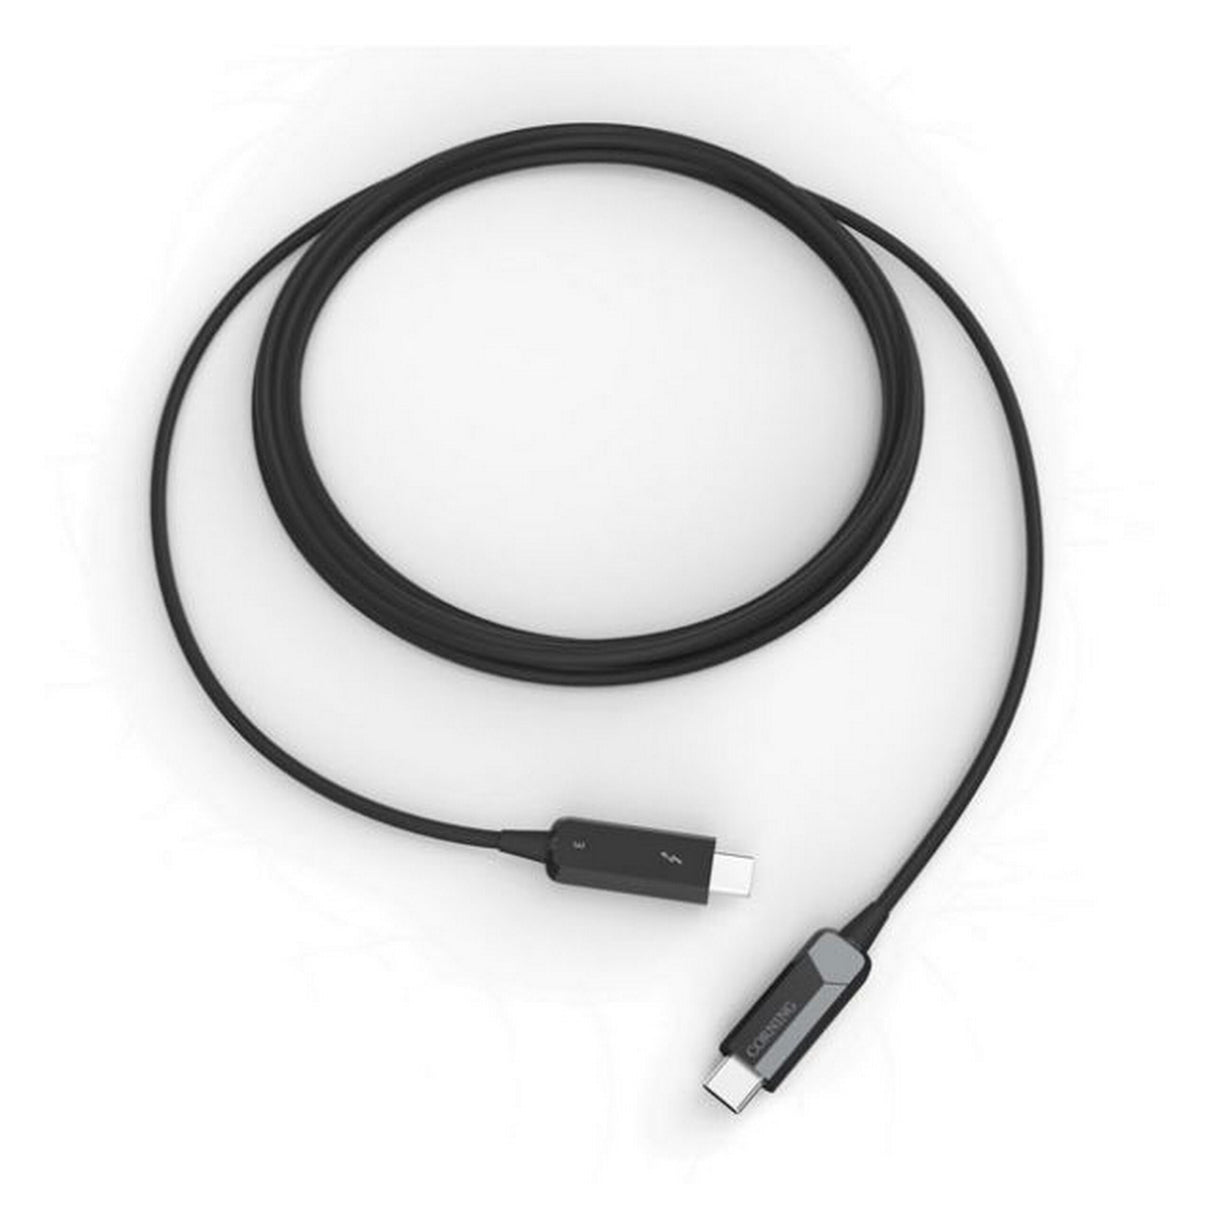 Corning 5 Meter Thunderbolt 3 USB-C Optical Cable